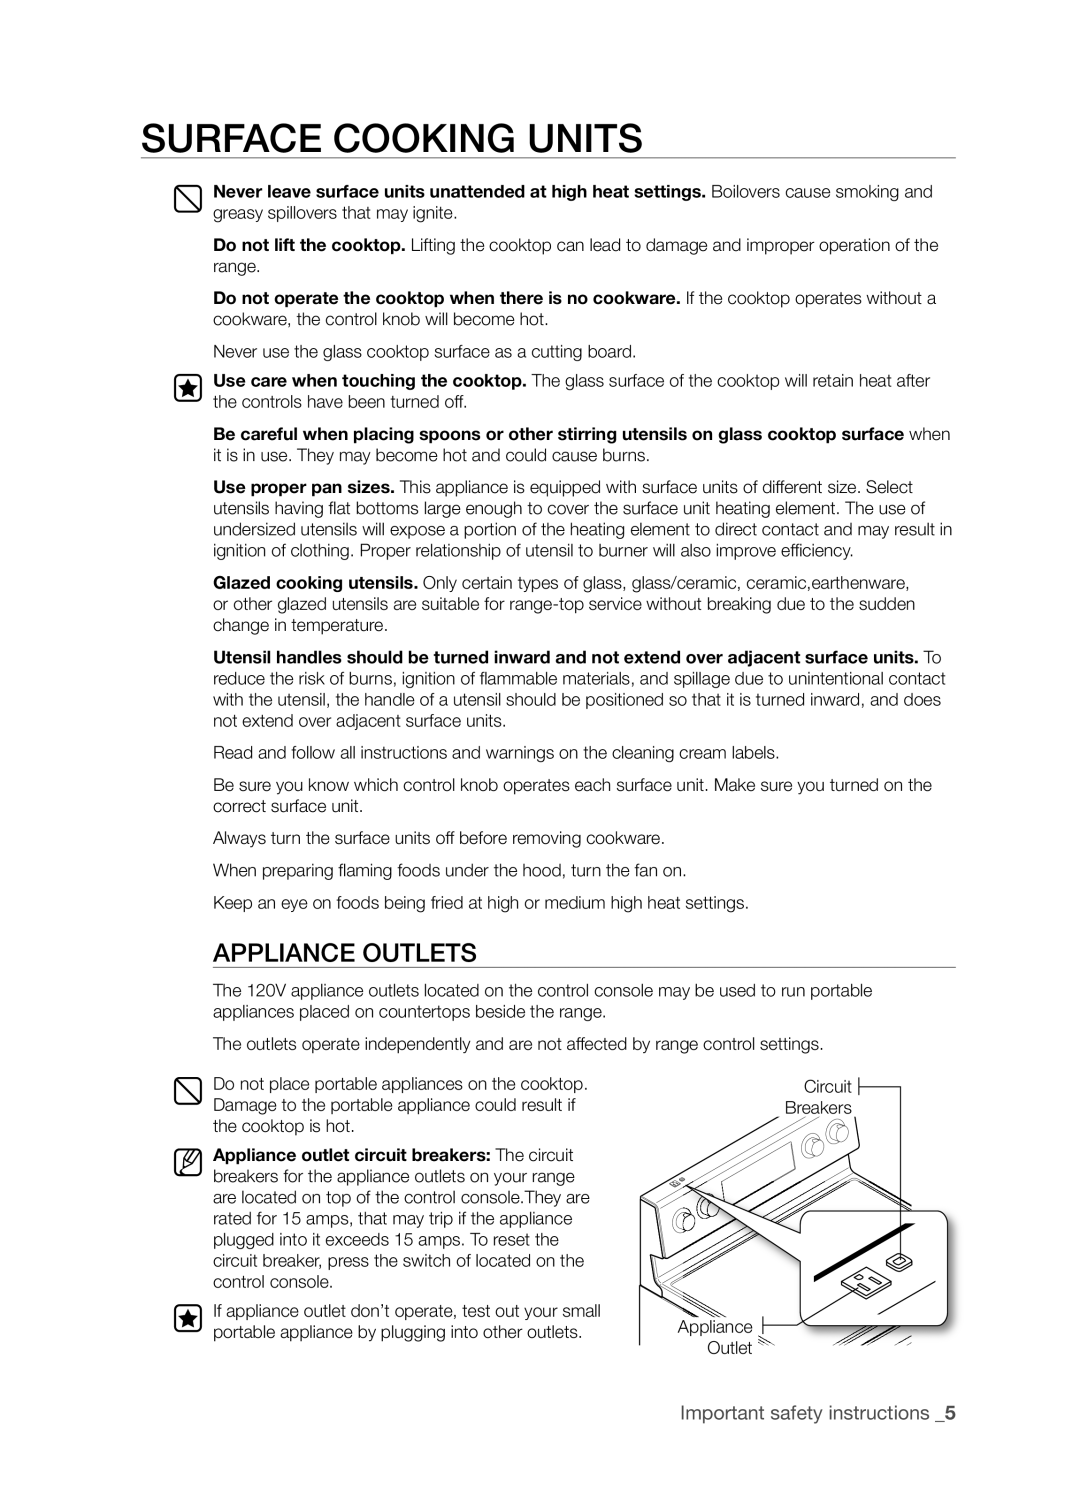 Samsung FTQ386LWX user manual Surface Cooking Units, Appliance Outlets, Important safety instructions _5 